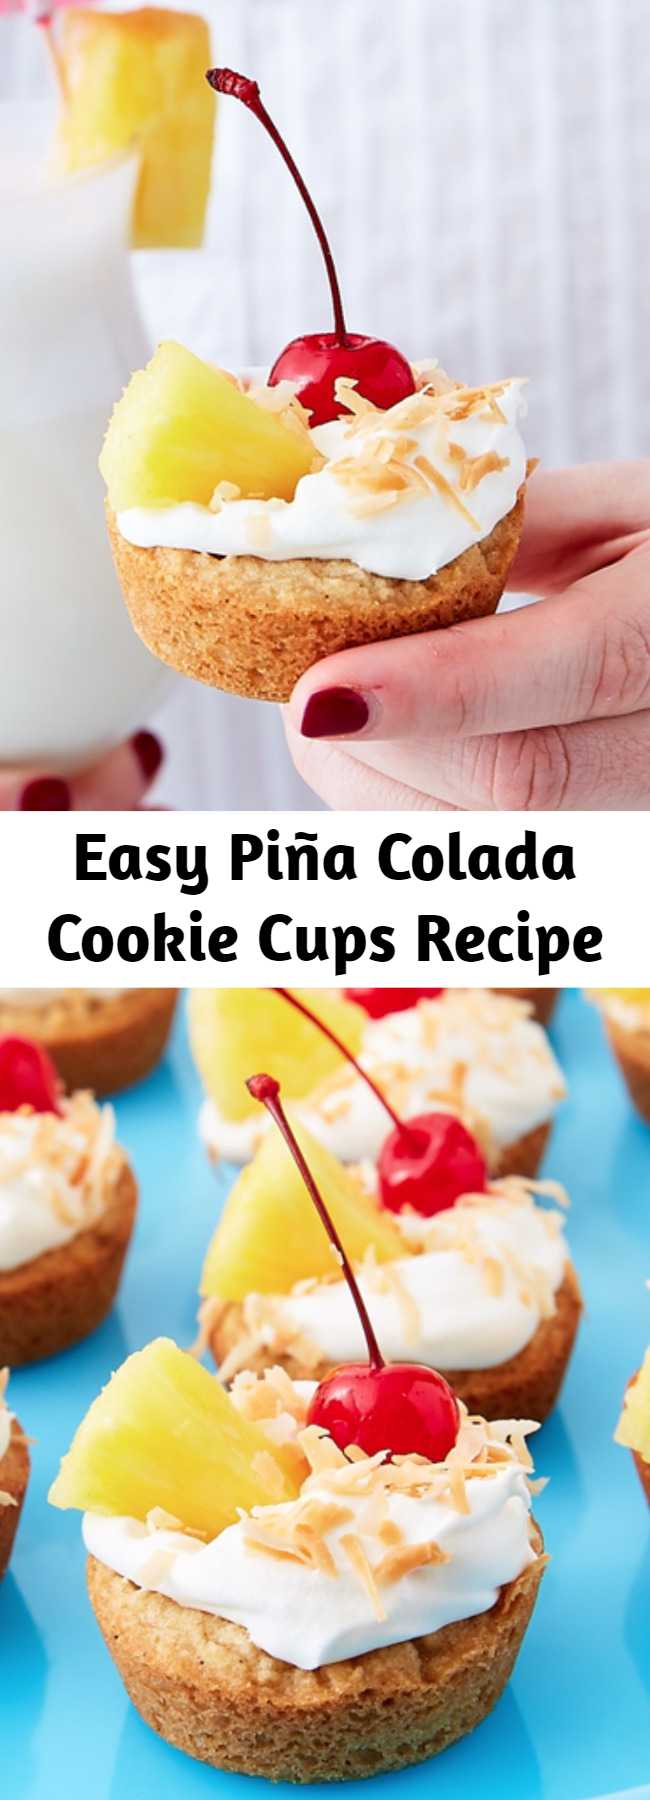 Easy Piña Colada Cookie Cups Recipe - The filling tastes like a cross between a slice of cheesecake and a piña colada. If you're bringing these to a party with little ones, feel free to skip the booze.